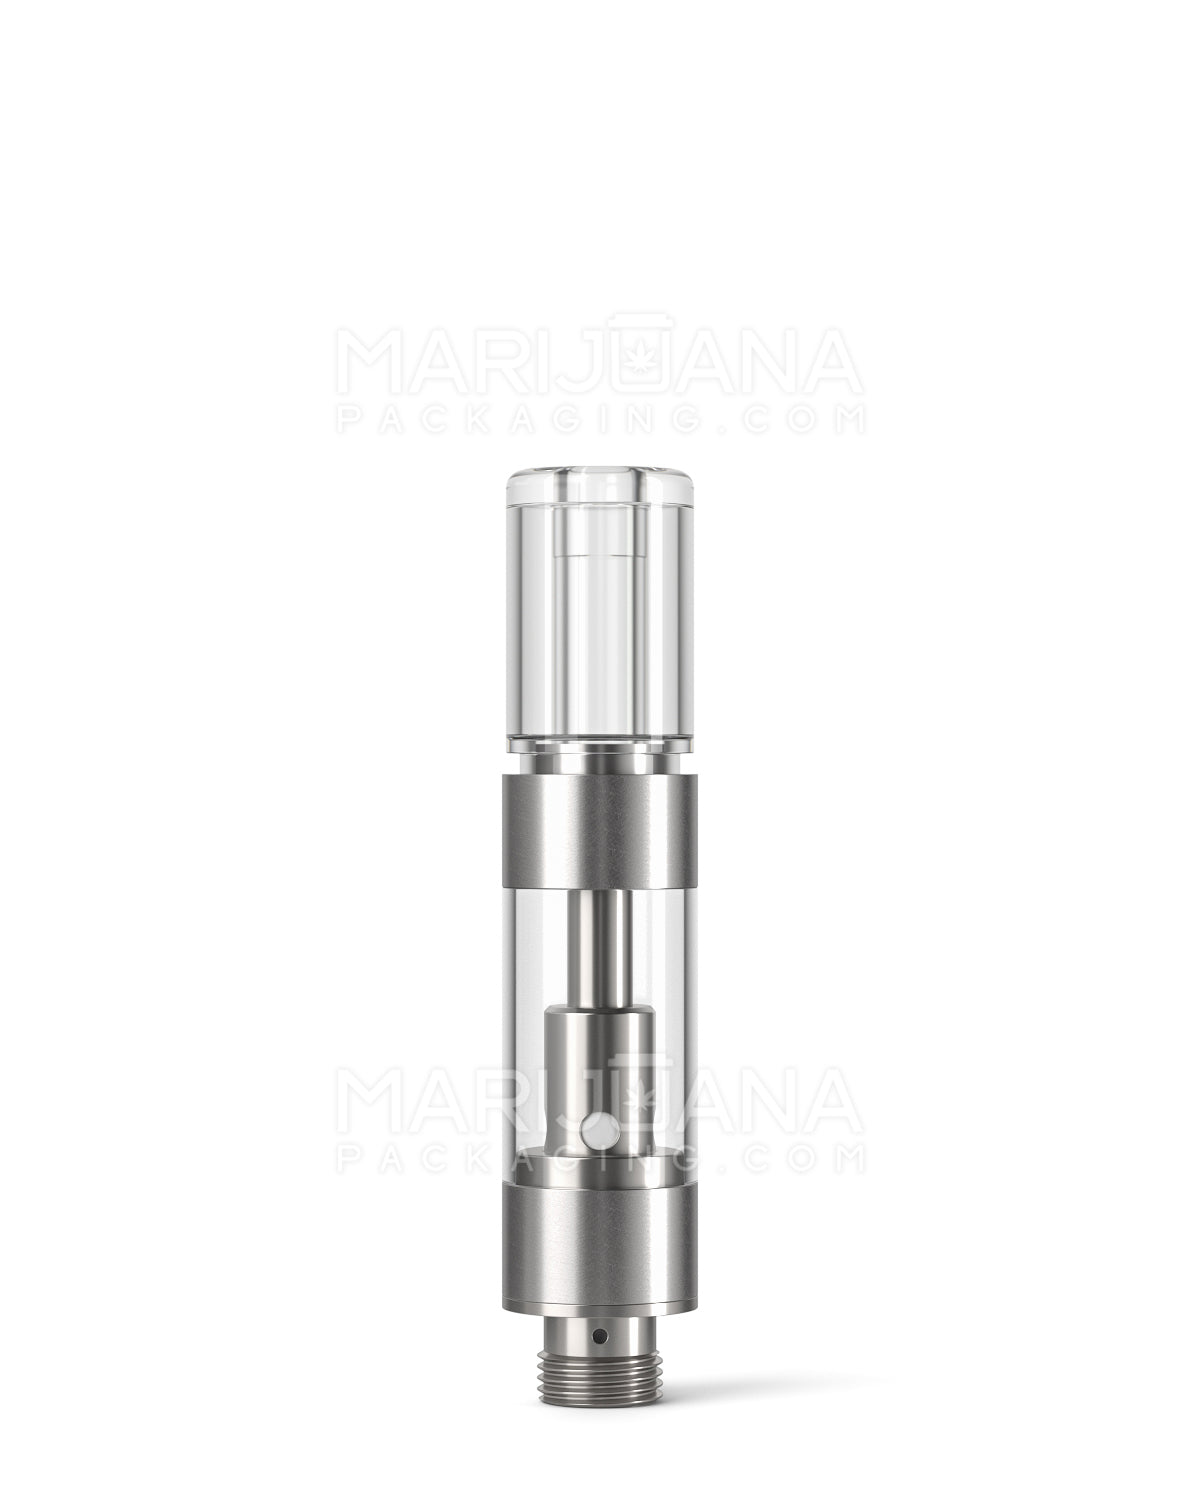 CCELL | Liquid6 Reactor Plastic Vape Cartridge with Barrel Clear Plastic Mouthpiece | 0.5mL - Press On - 100 Count - 1